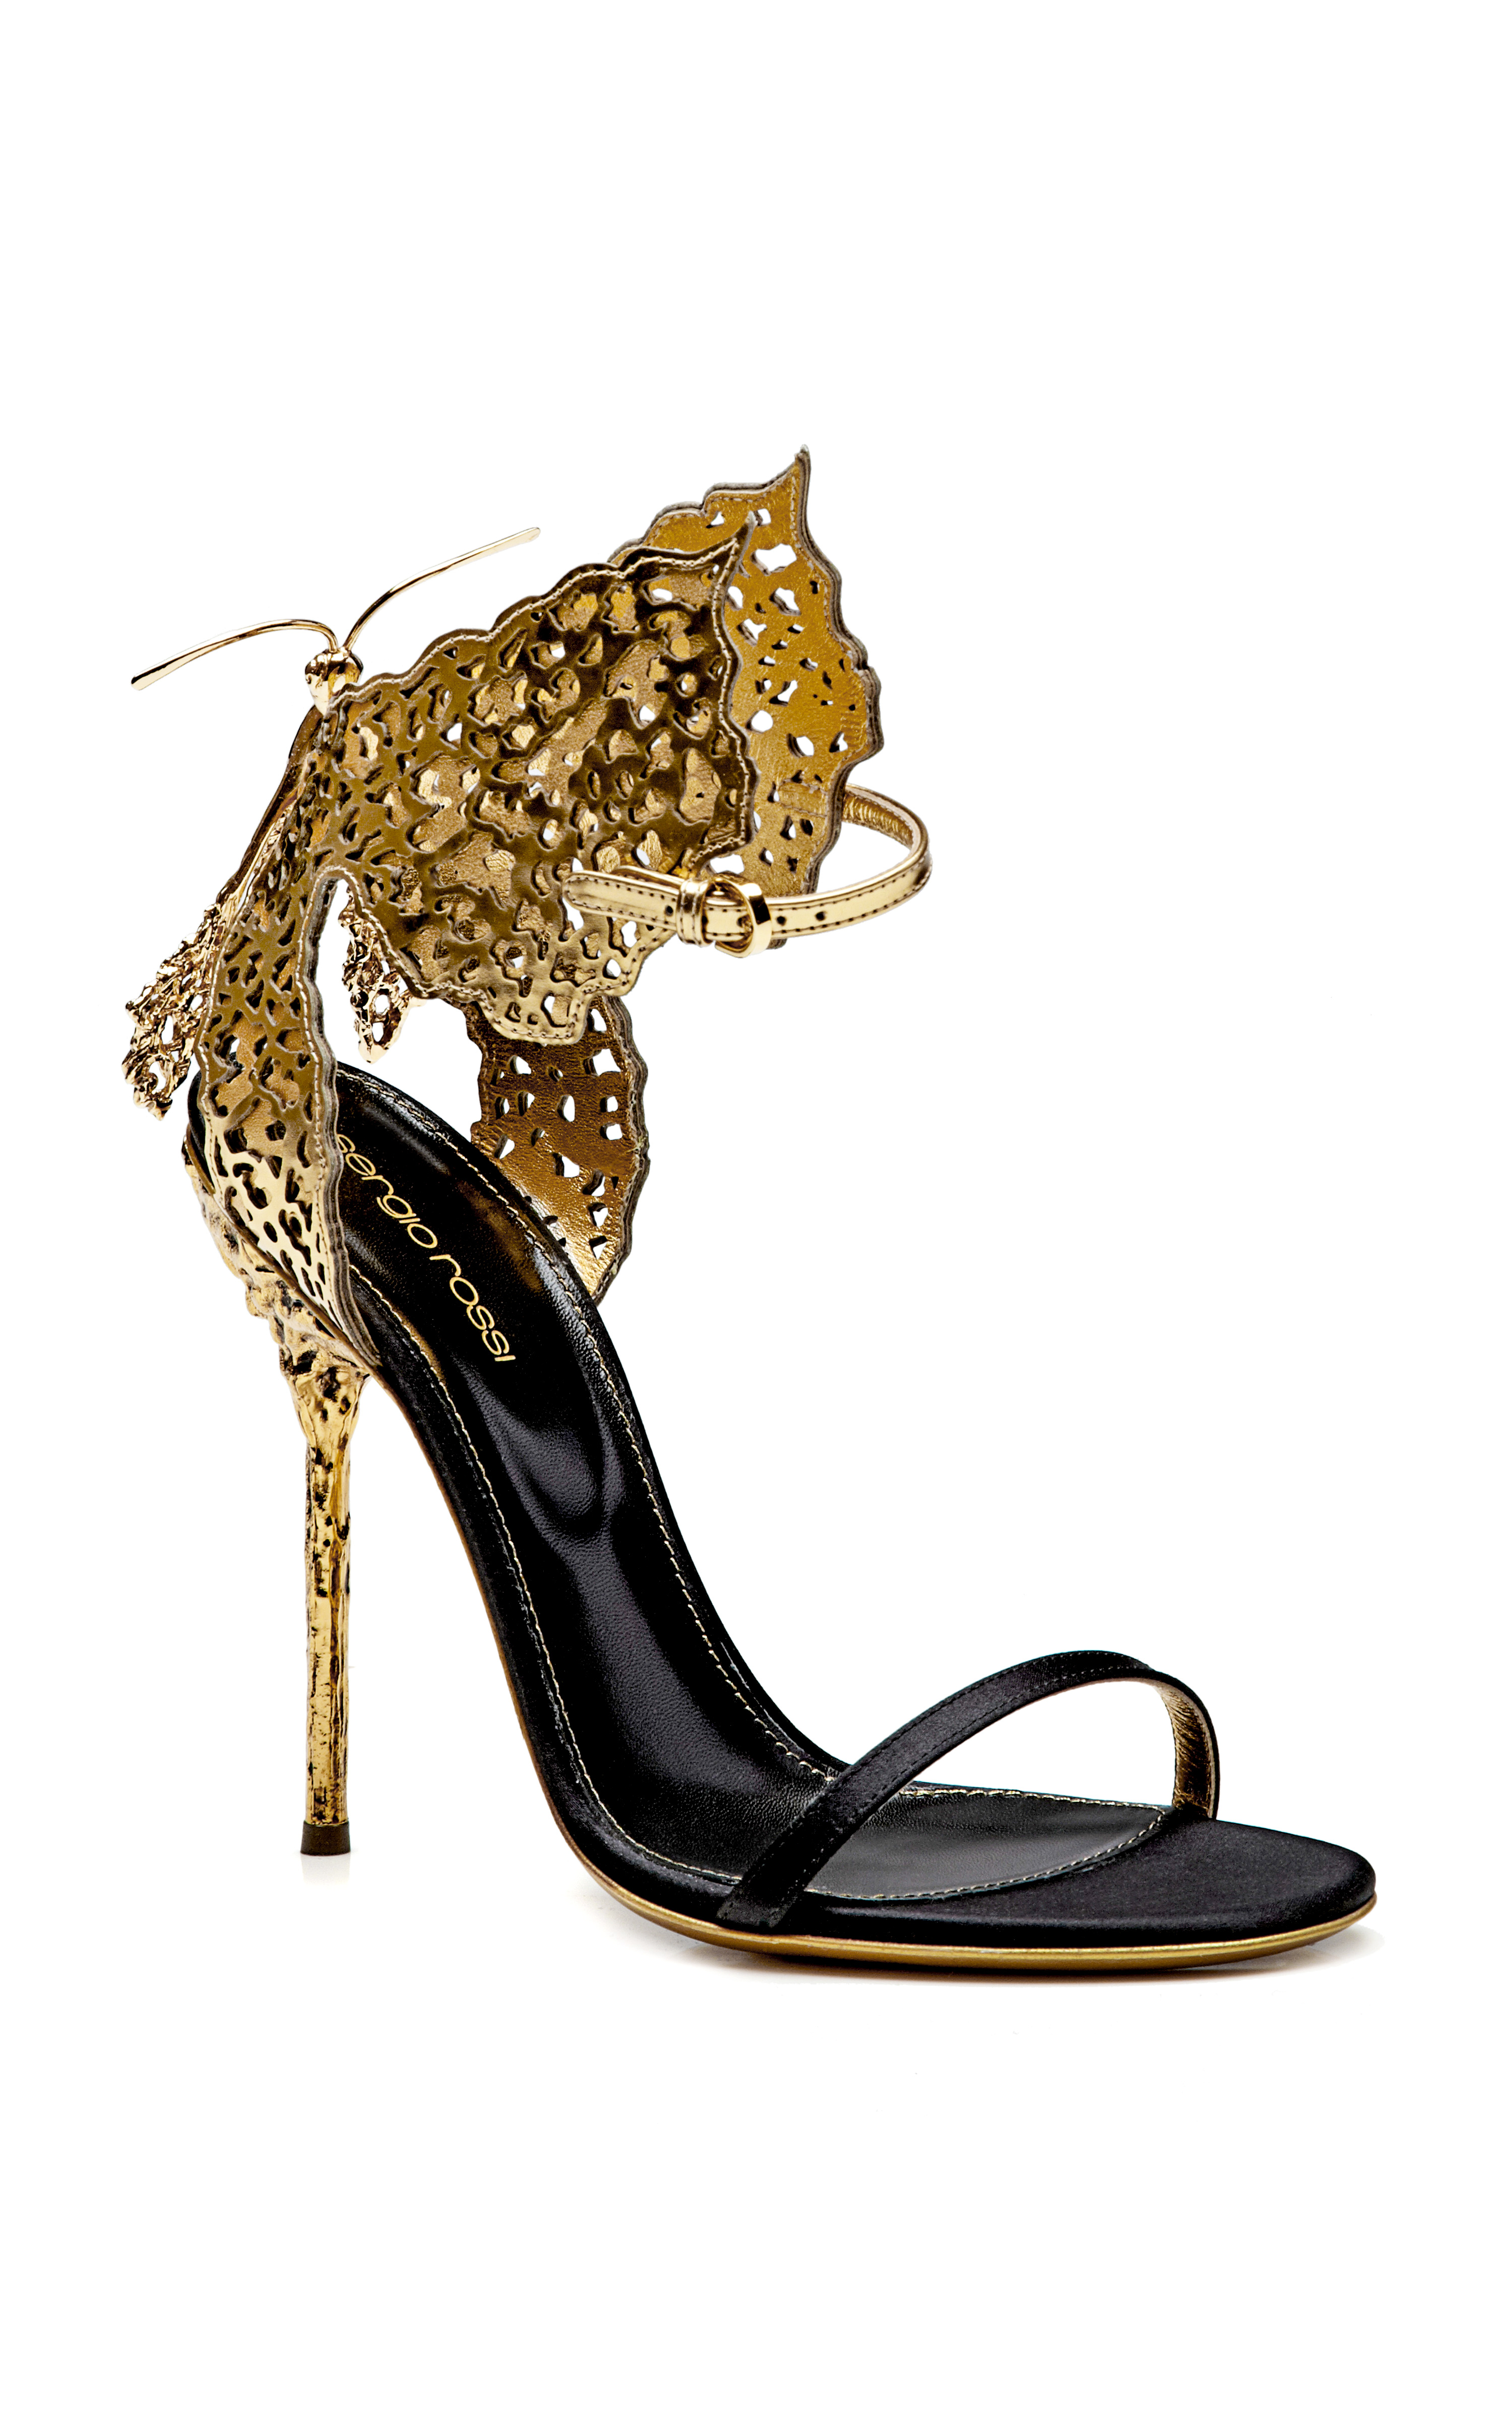 Lyst - Sergio rossi Butterfly Cutout Satin And Metallic Leather Sandals ...